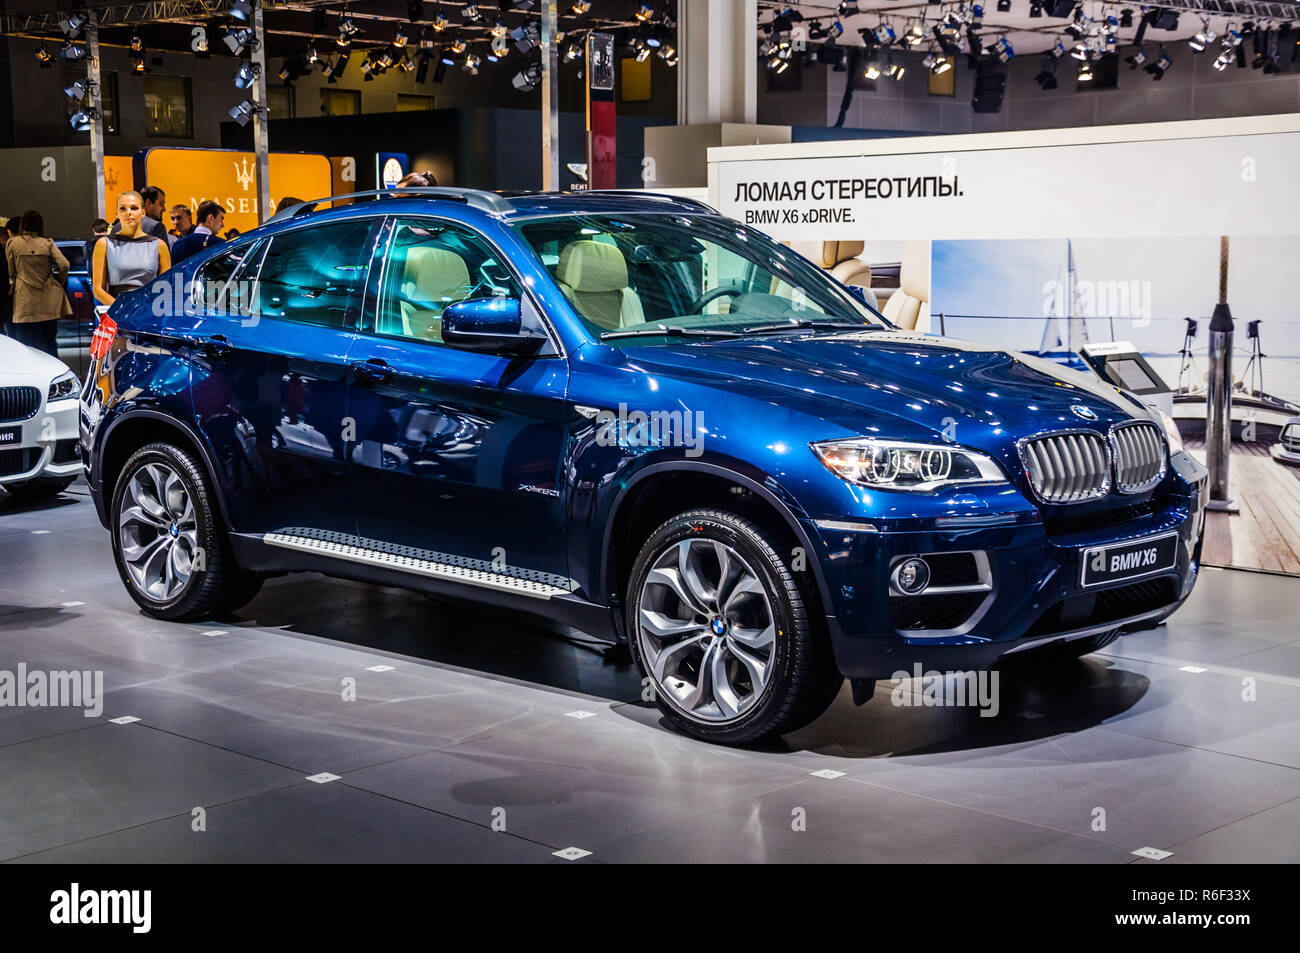 https://c8.alamy.com/comp/R6F33X/moscow-russia-aug-2012-bmw-x6-e71-presented-as-world-premiere-at-the-16th-mias-moscow-international-automobile-salon-on-august-30-2012-in-mosco-R6F33X.jpg